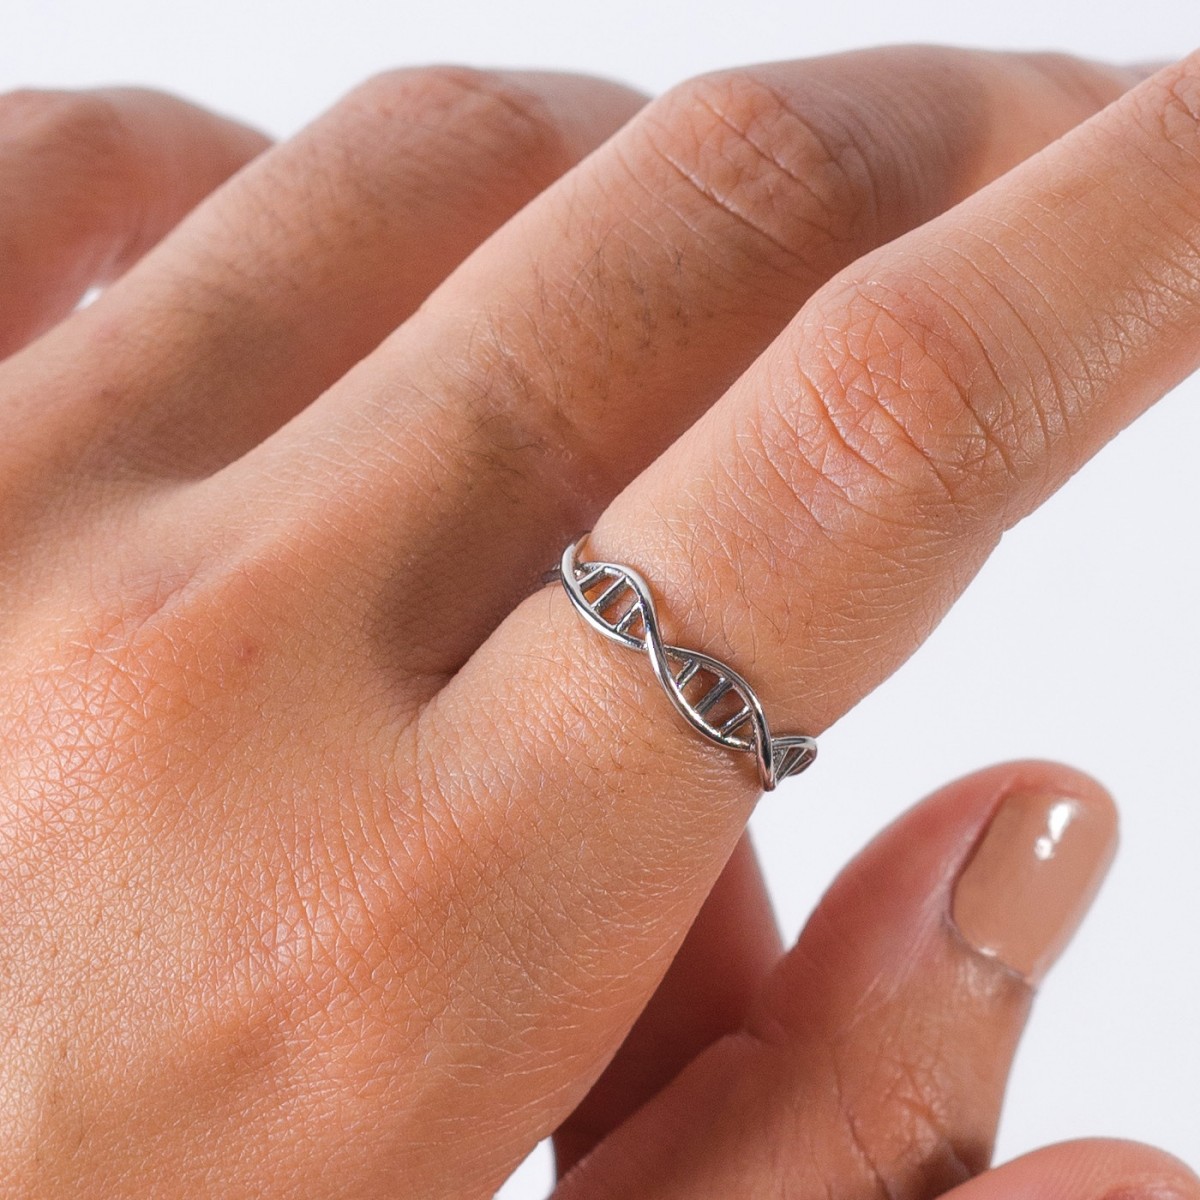 Buy DNA Ring, Geek Wedding Ring, Microbiology, Geek Wedding Band, Science  Ring, Biology Ring, Helix Ring, Fathers Day, Father's Day Gift Online in  India - Etsy